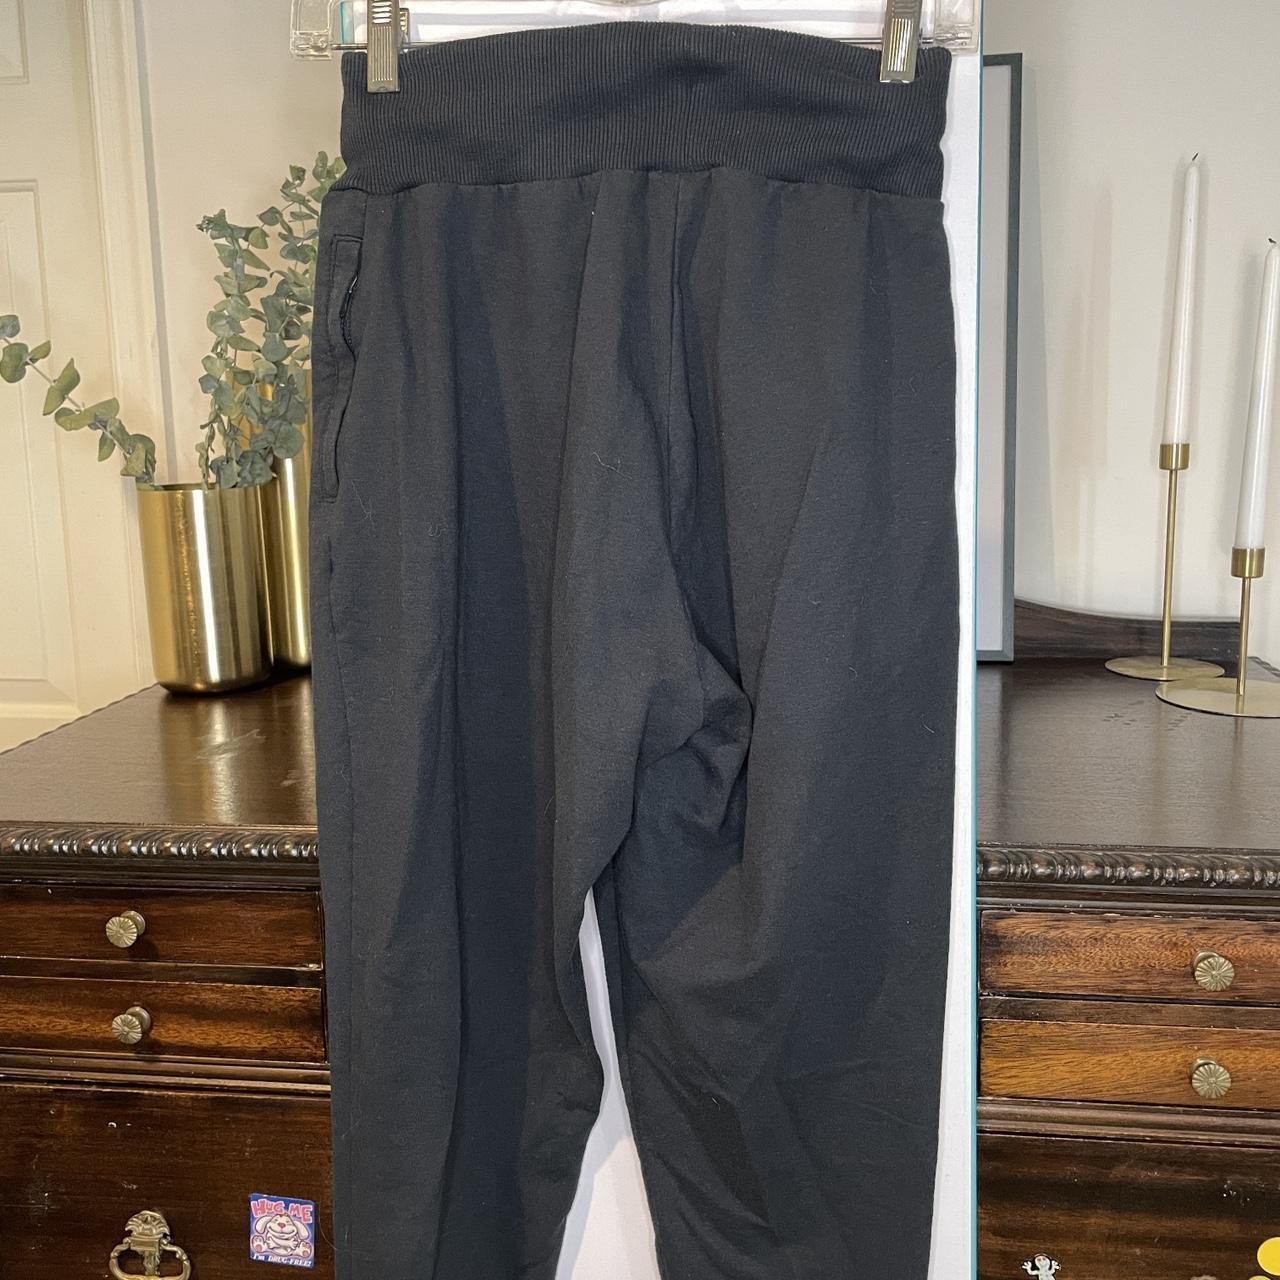 Ark High Waisted Jogger in Black Size Small never - Depop